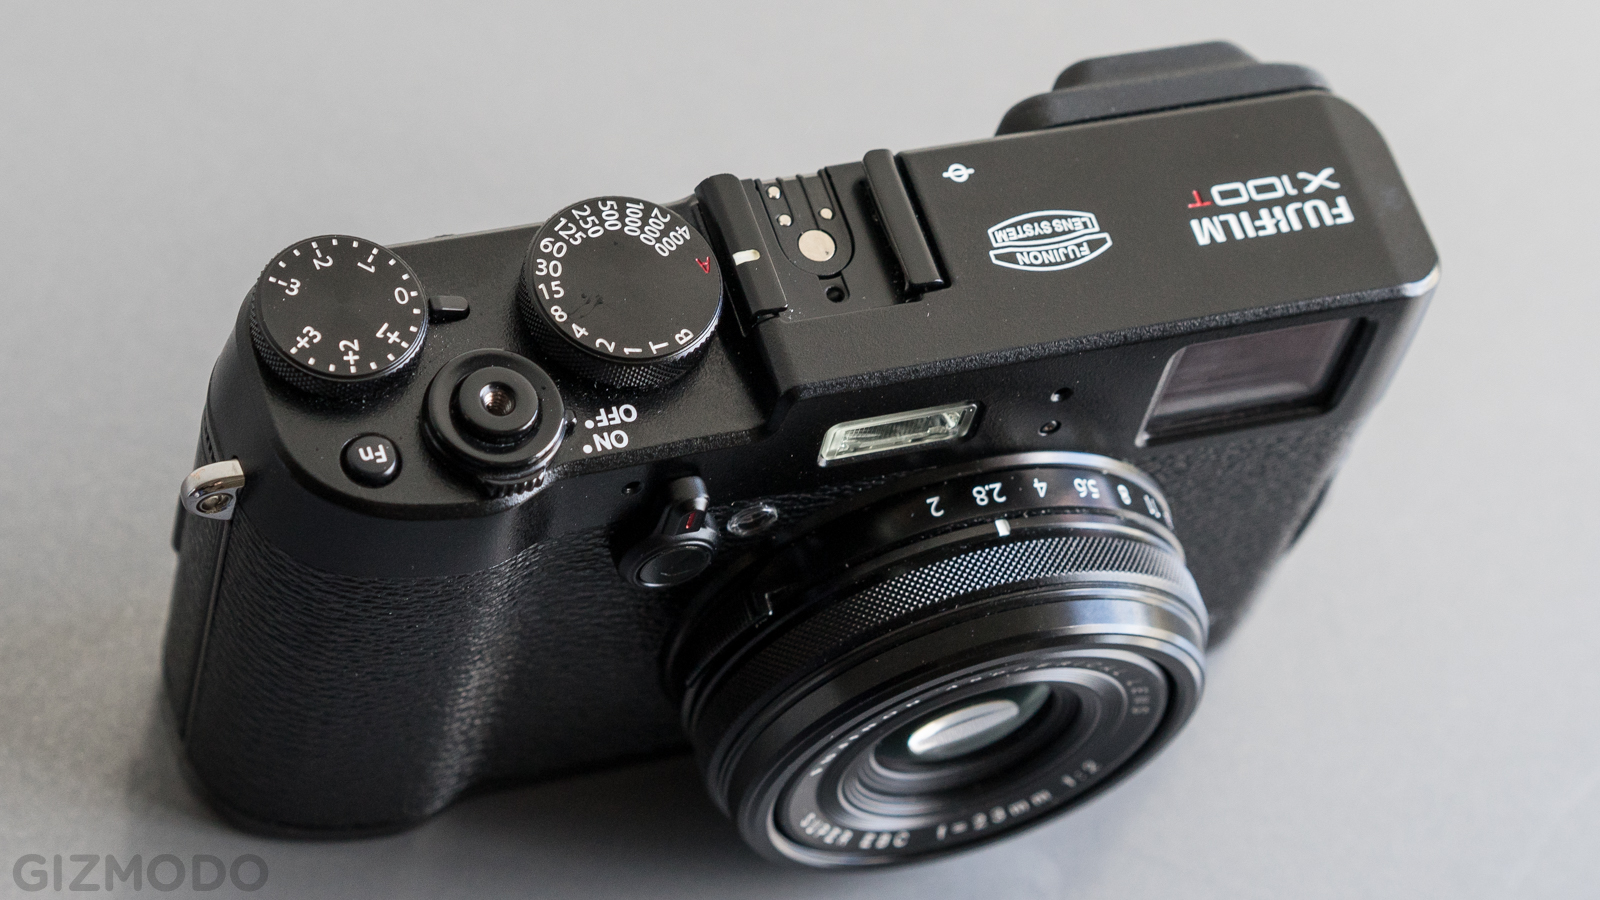 Field Test: Fujifilm’s X100T Is The Most Amazing Camera I’d Never Buy